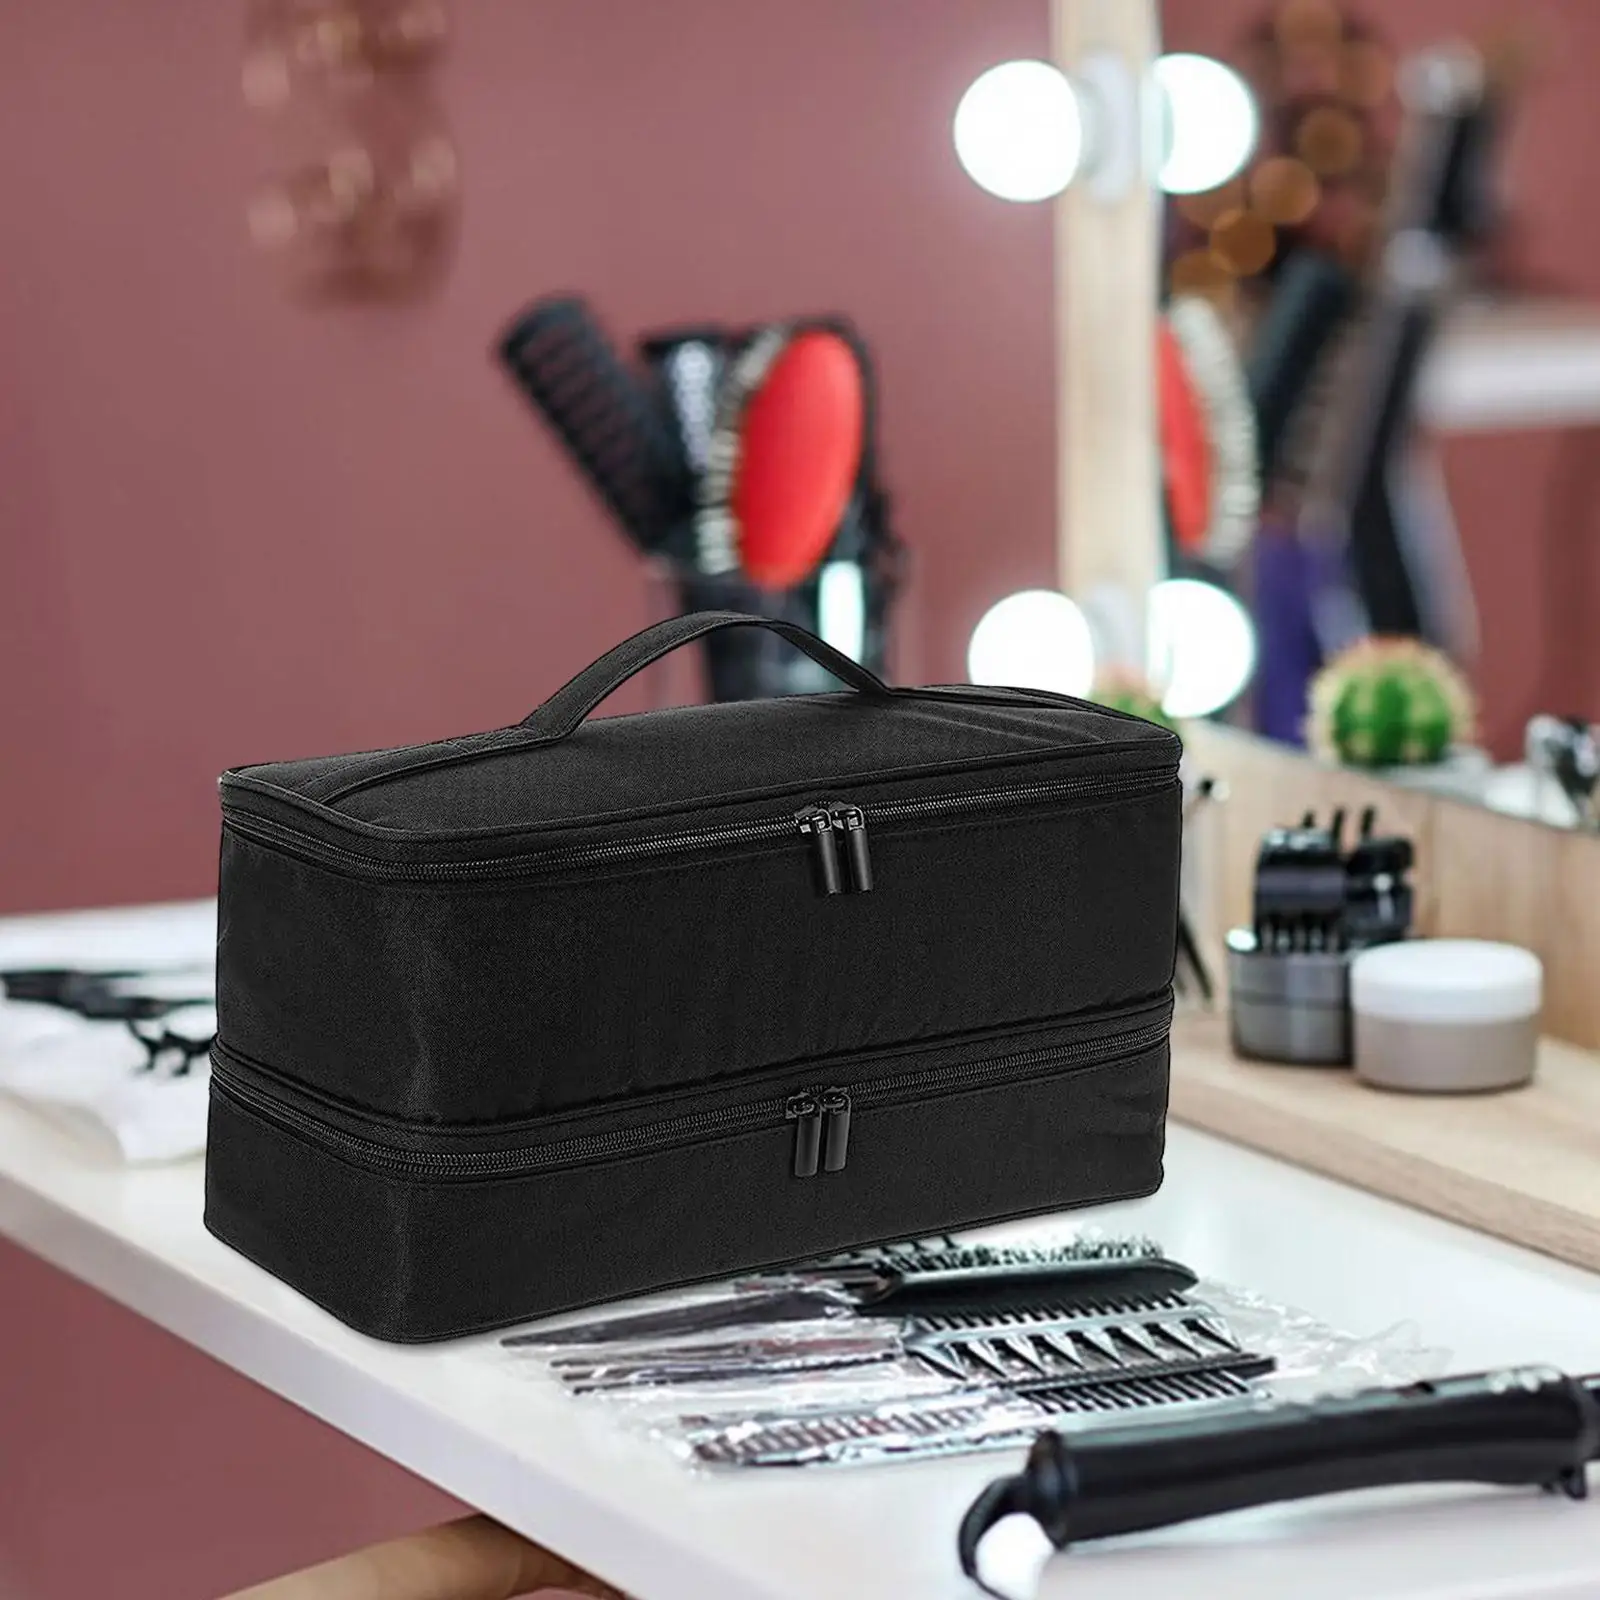 Travel Case Hair Dryer Storage Bag Curling Organizer Bag Large Makeup Case Double Layer Carrying Case for Home, Business Trip